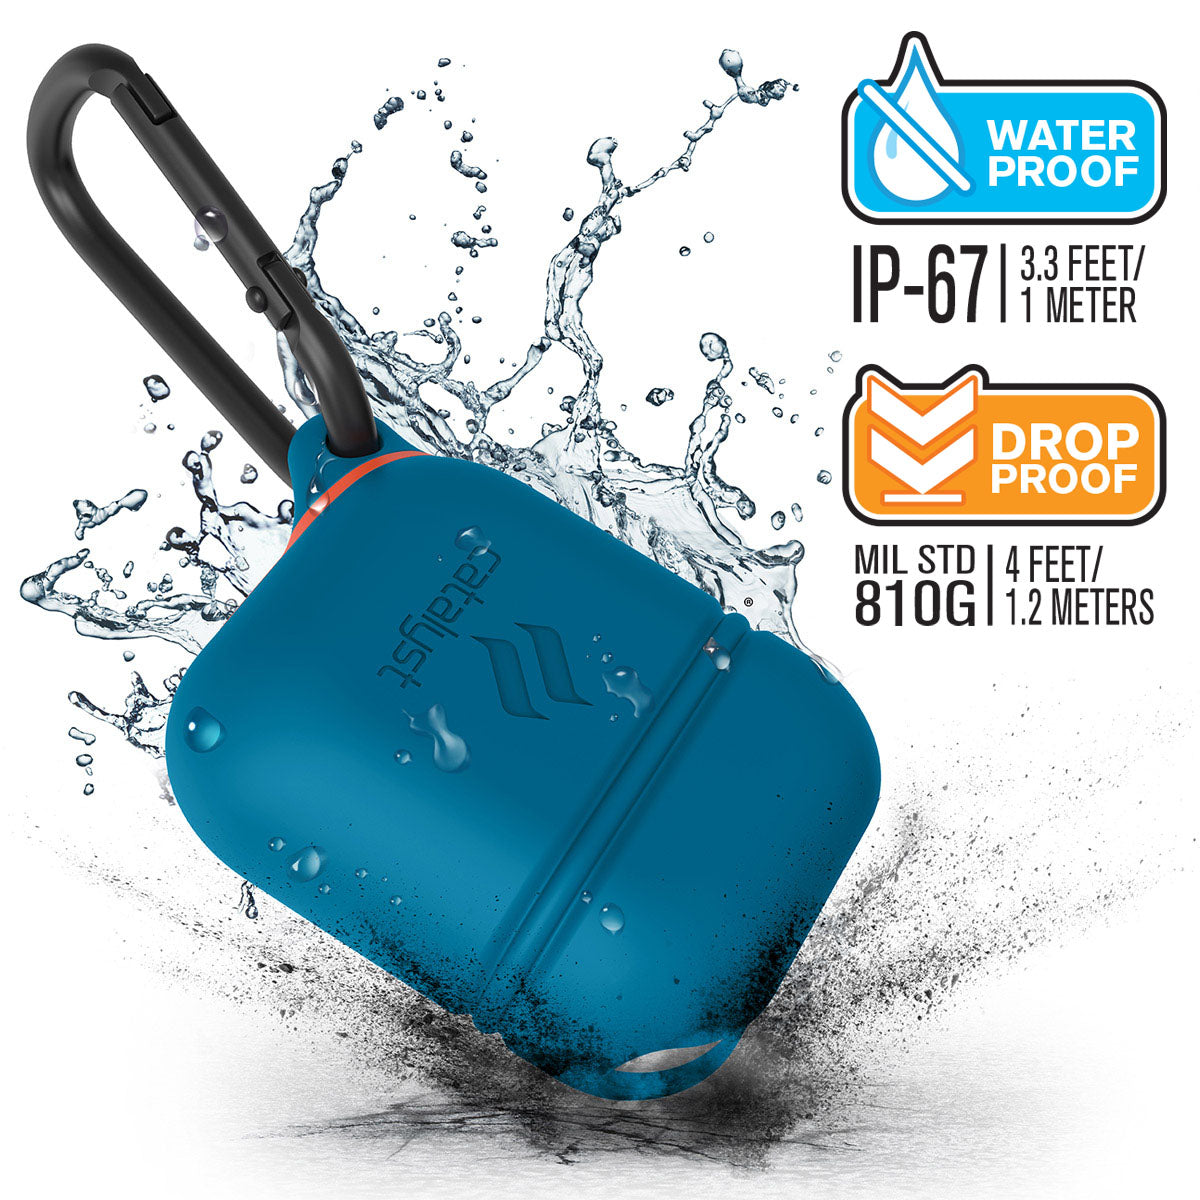 CATAPDTBFC-FBA | Catalyst airpods gen2/1 waterproof case + carabiner showing the case drop proof and water proof features with attached carabiner in blueridge-sunset text reads water proof IP-67 3.3 FEET/1 METER DROP PROOF MIL STD 810G 1.2 METERS